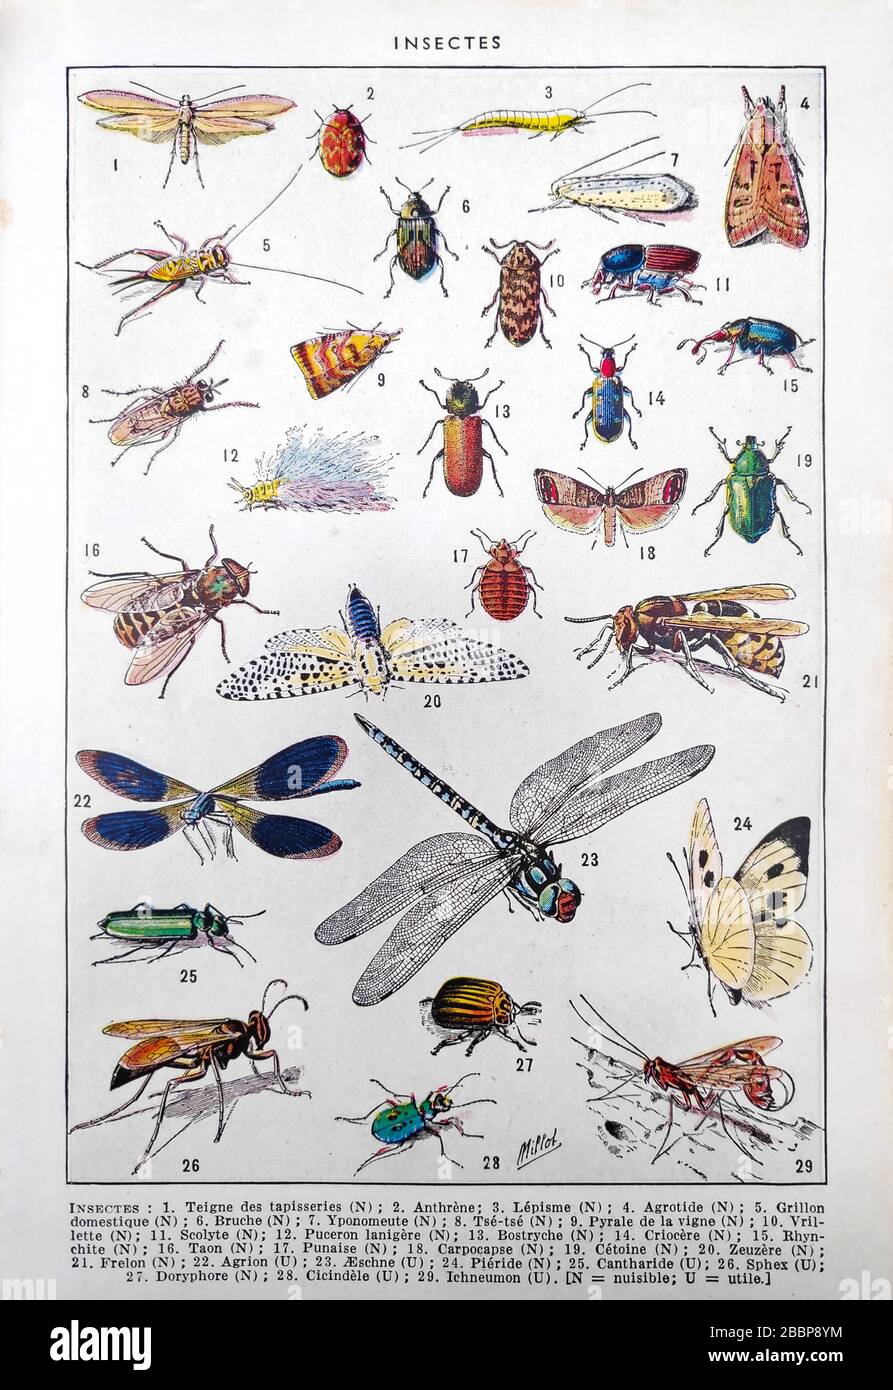 Old illustration about insects by Adolphe Philippe Millot printed in the late 19th century. Stock Photo